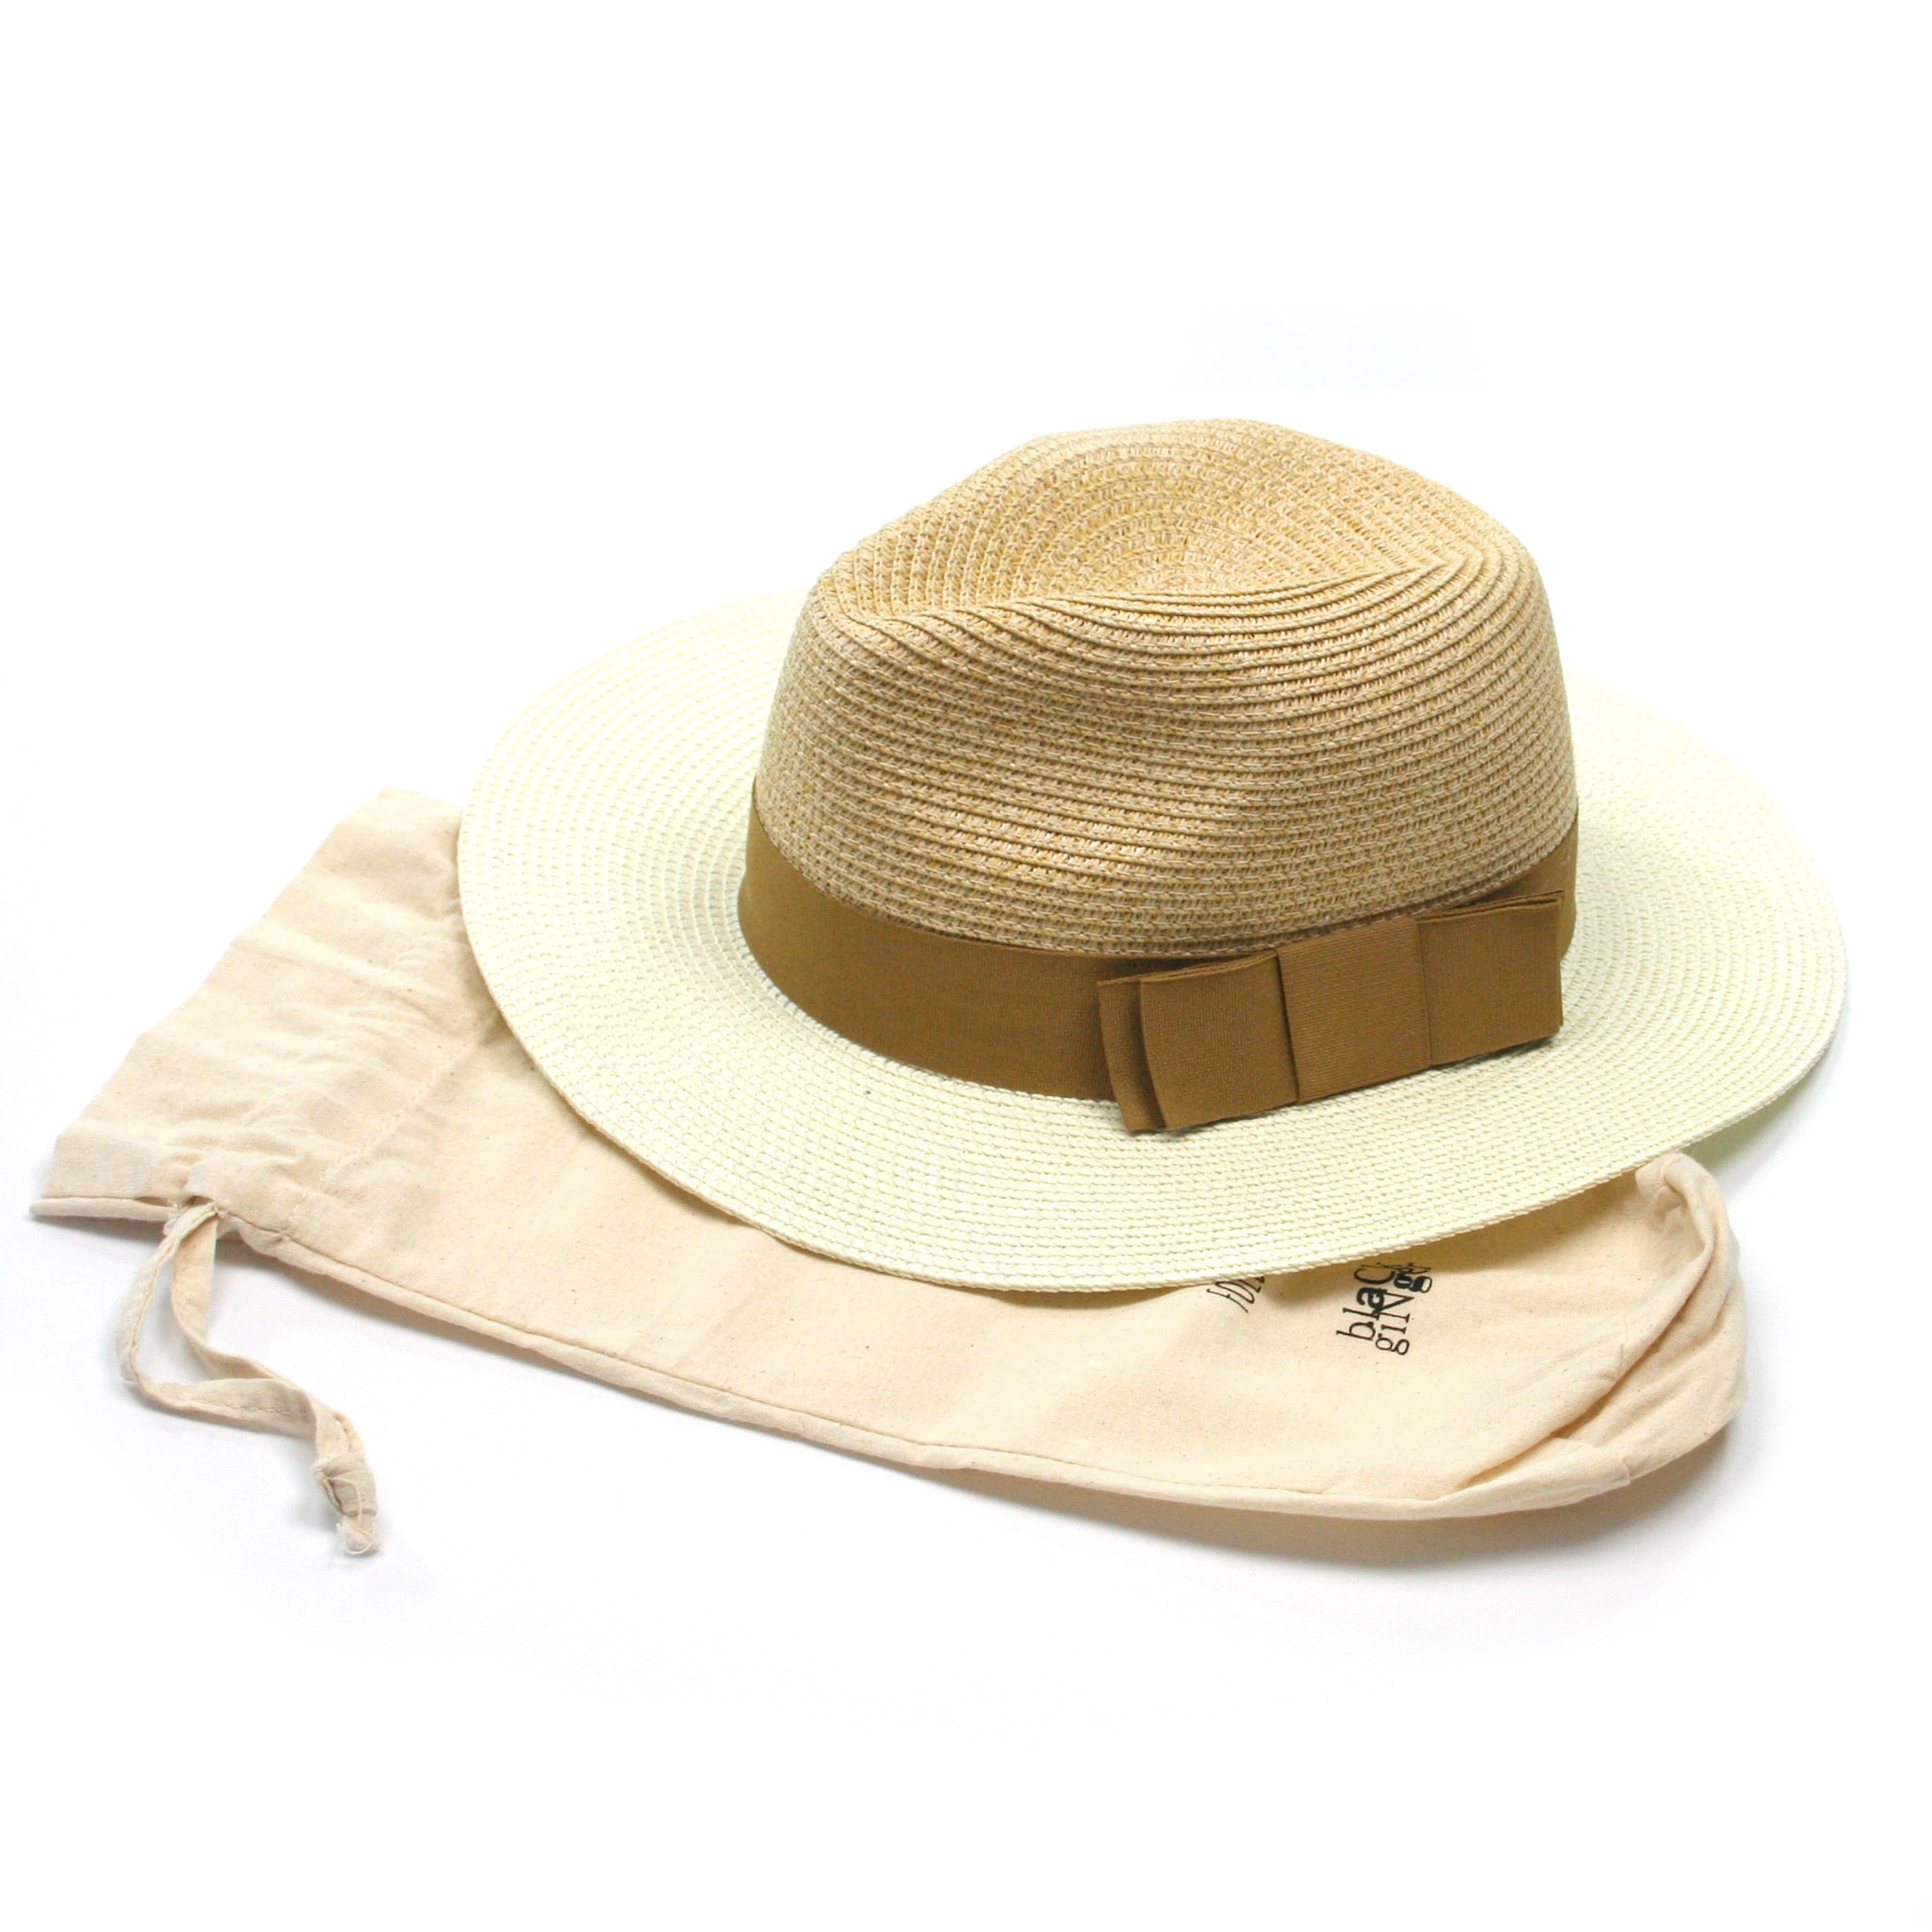 Two Tone Panama Foldable Hat - Natural/Yellow  (with Bag) 1